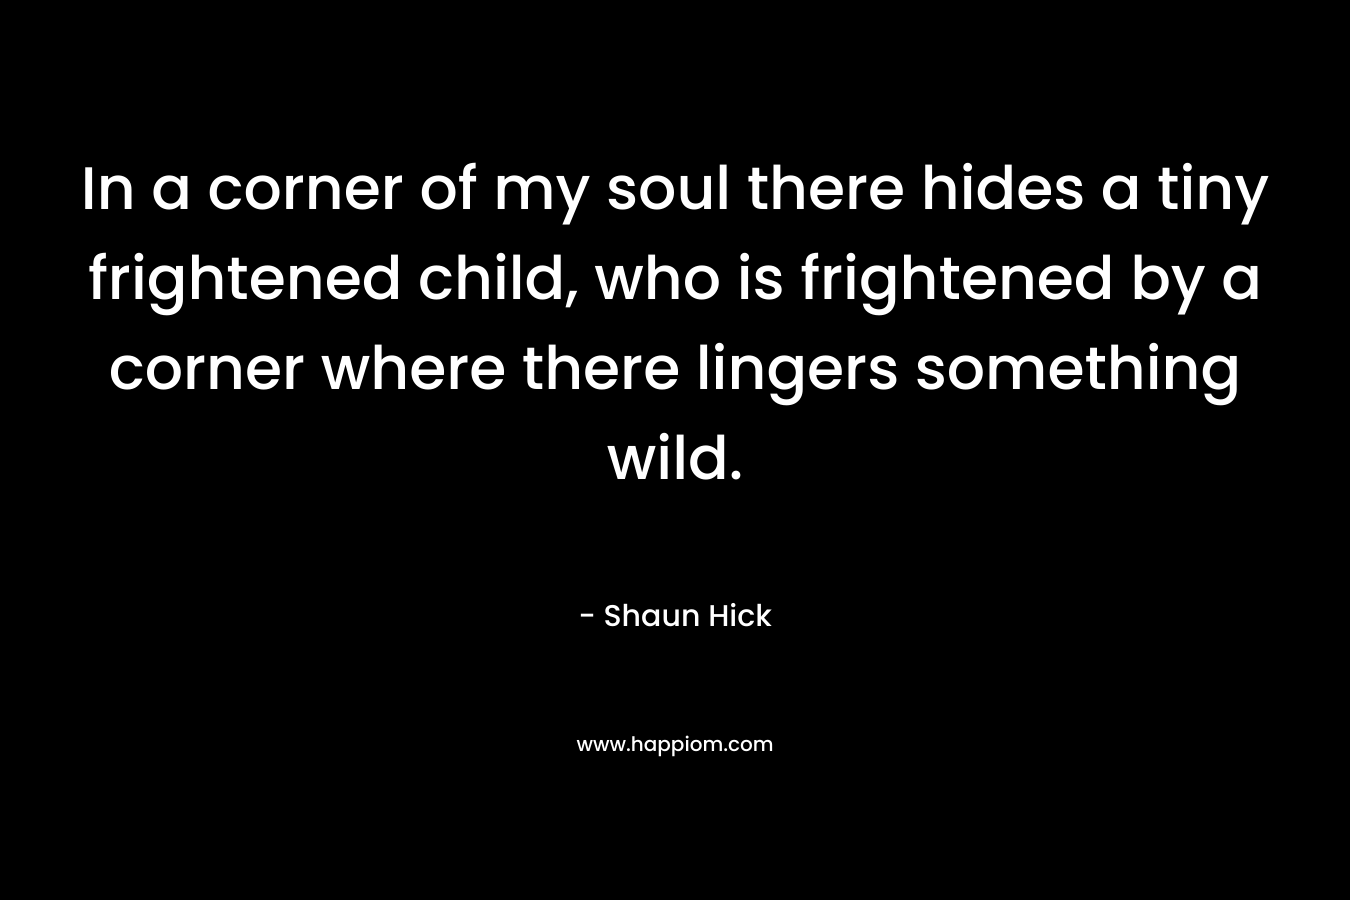 In a corner of my soul there hides a tiny frightened child, who is frightened by a corner where there lingers something wild. – Shaun Hick